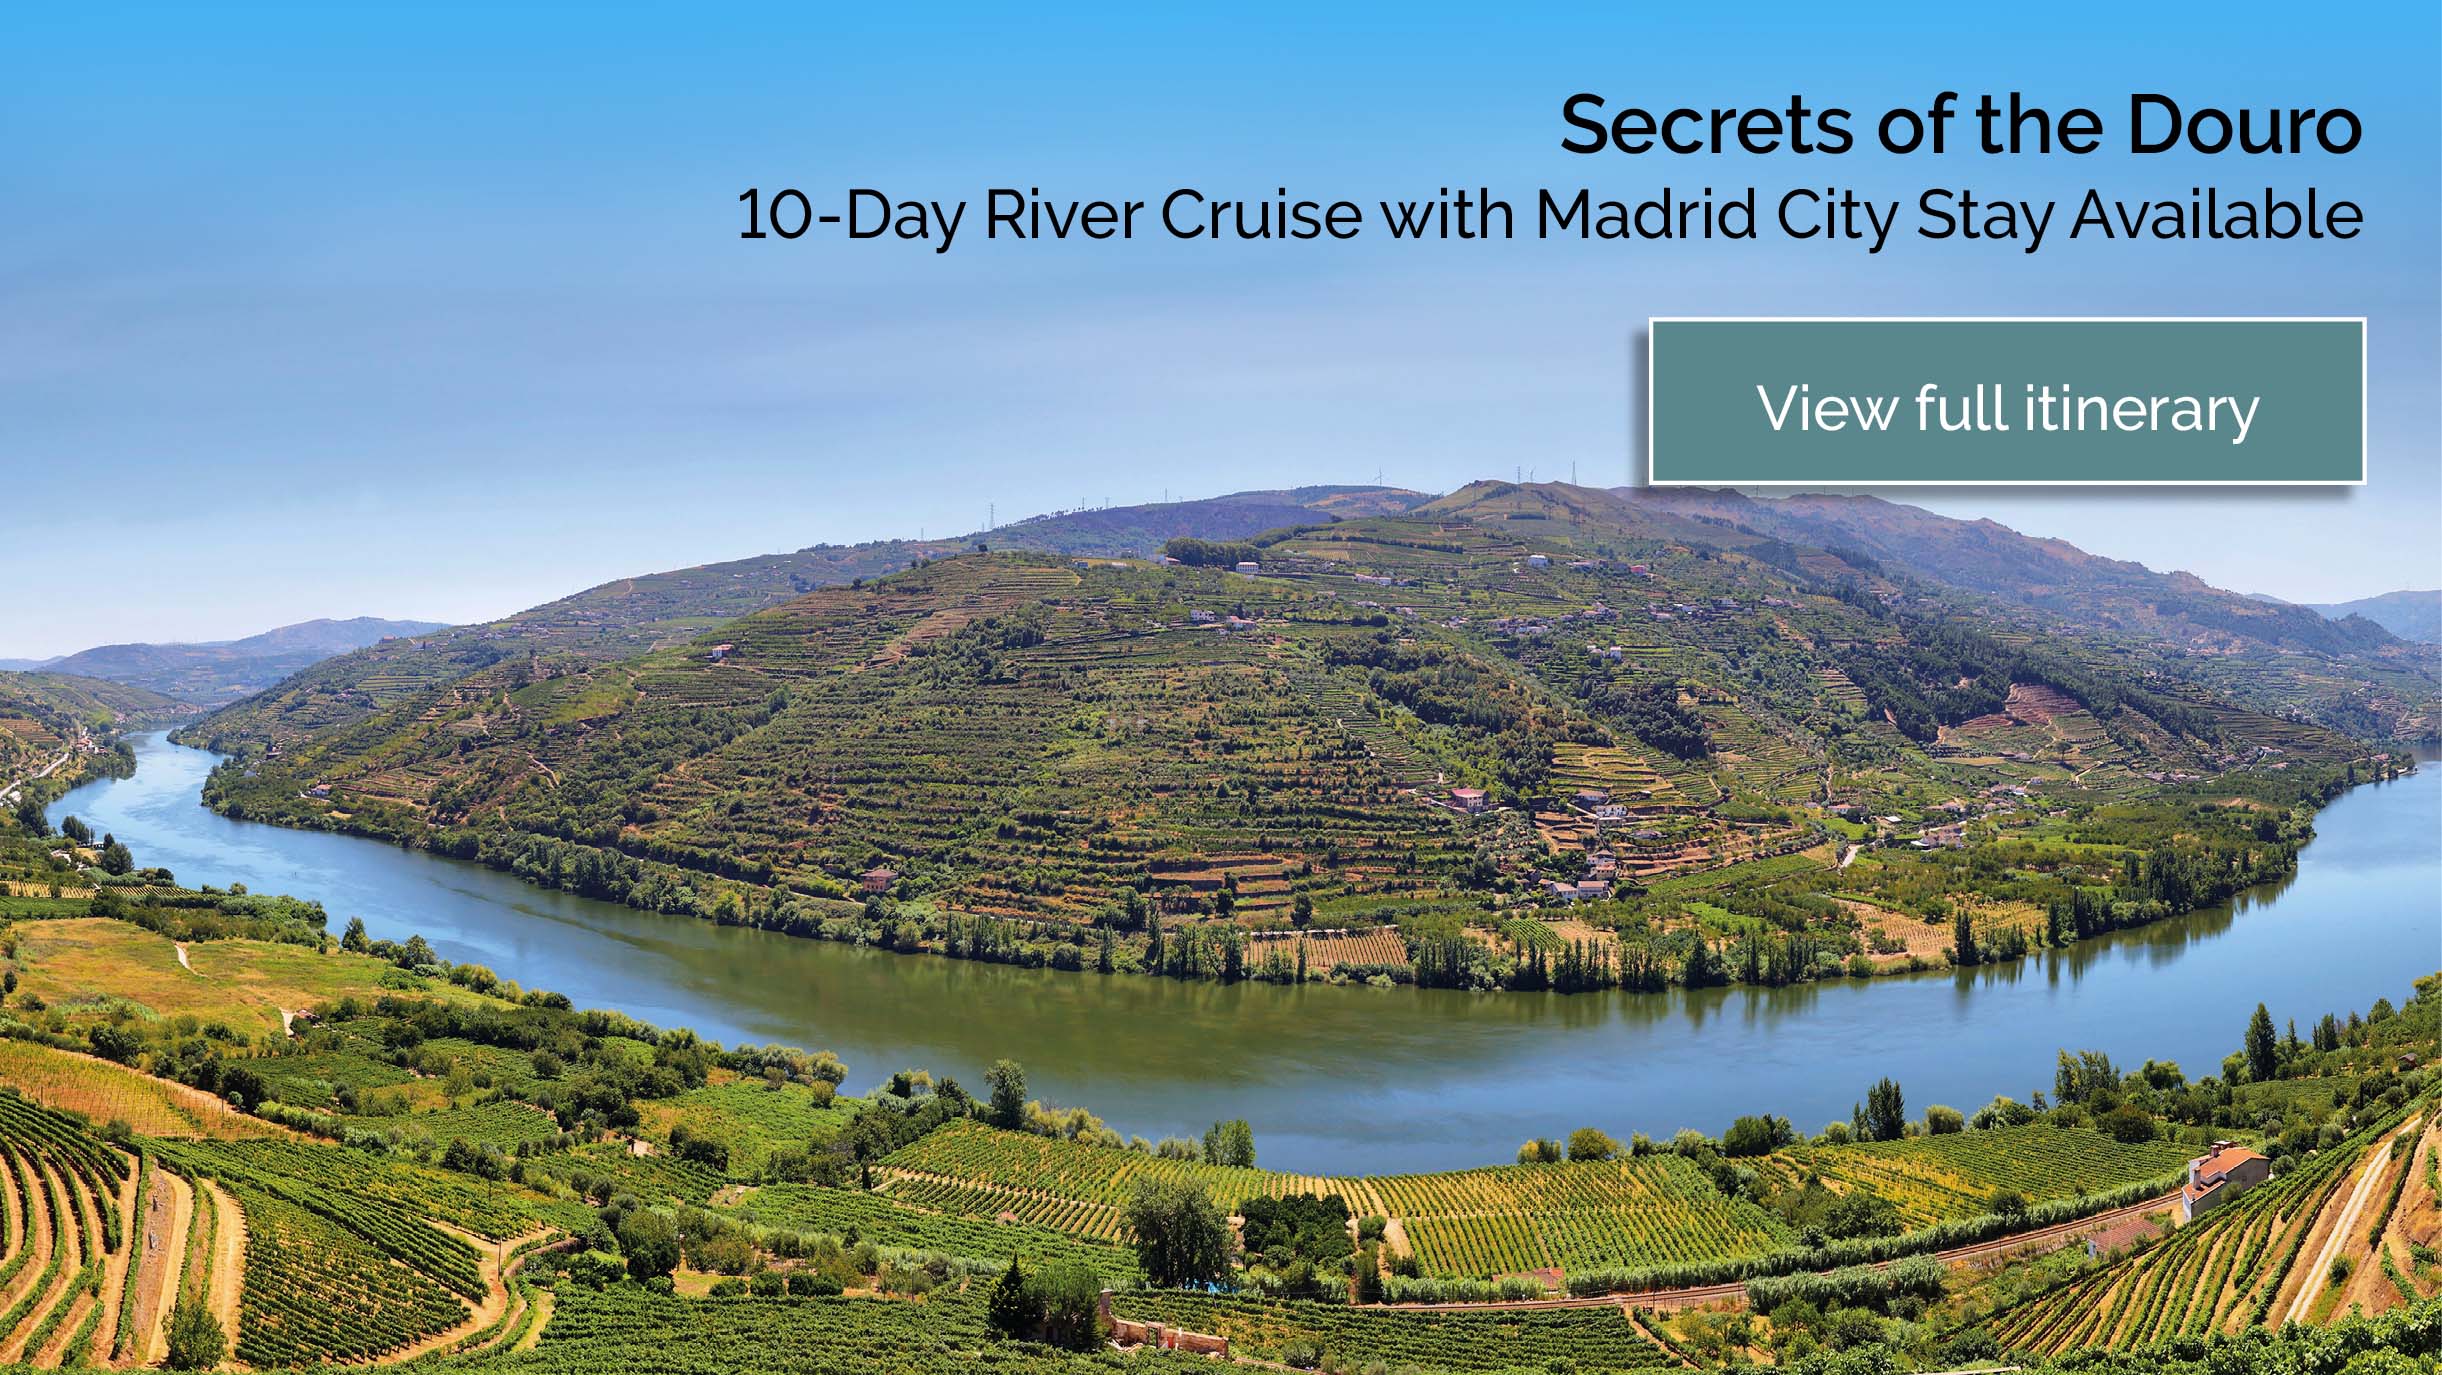 view the full Secrets of the Douro 10-Day River Cruise with Madrid City Stay itinerary here